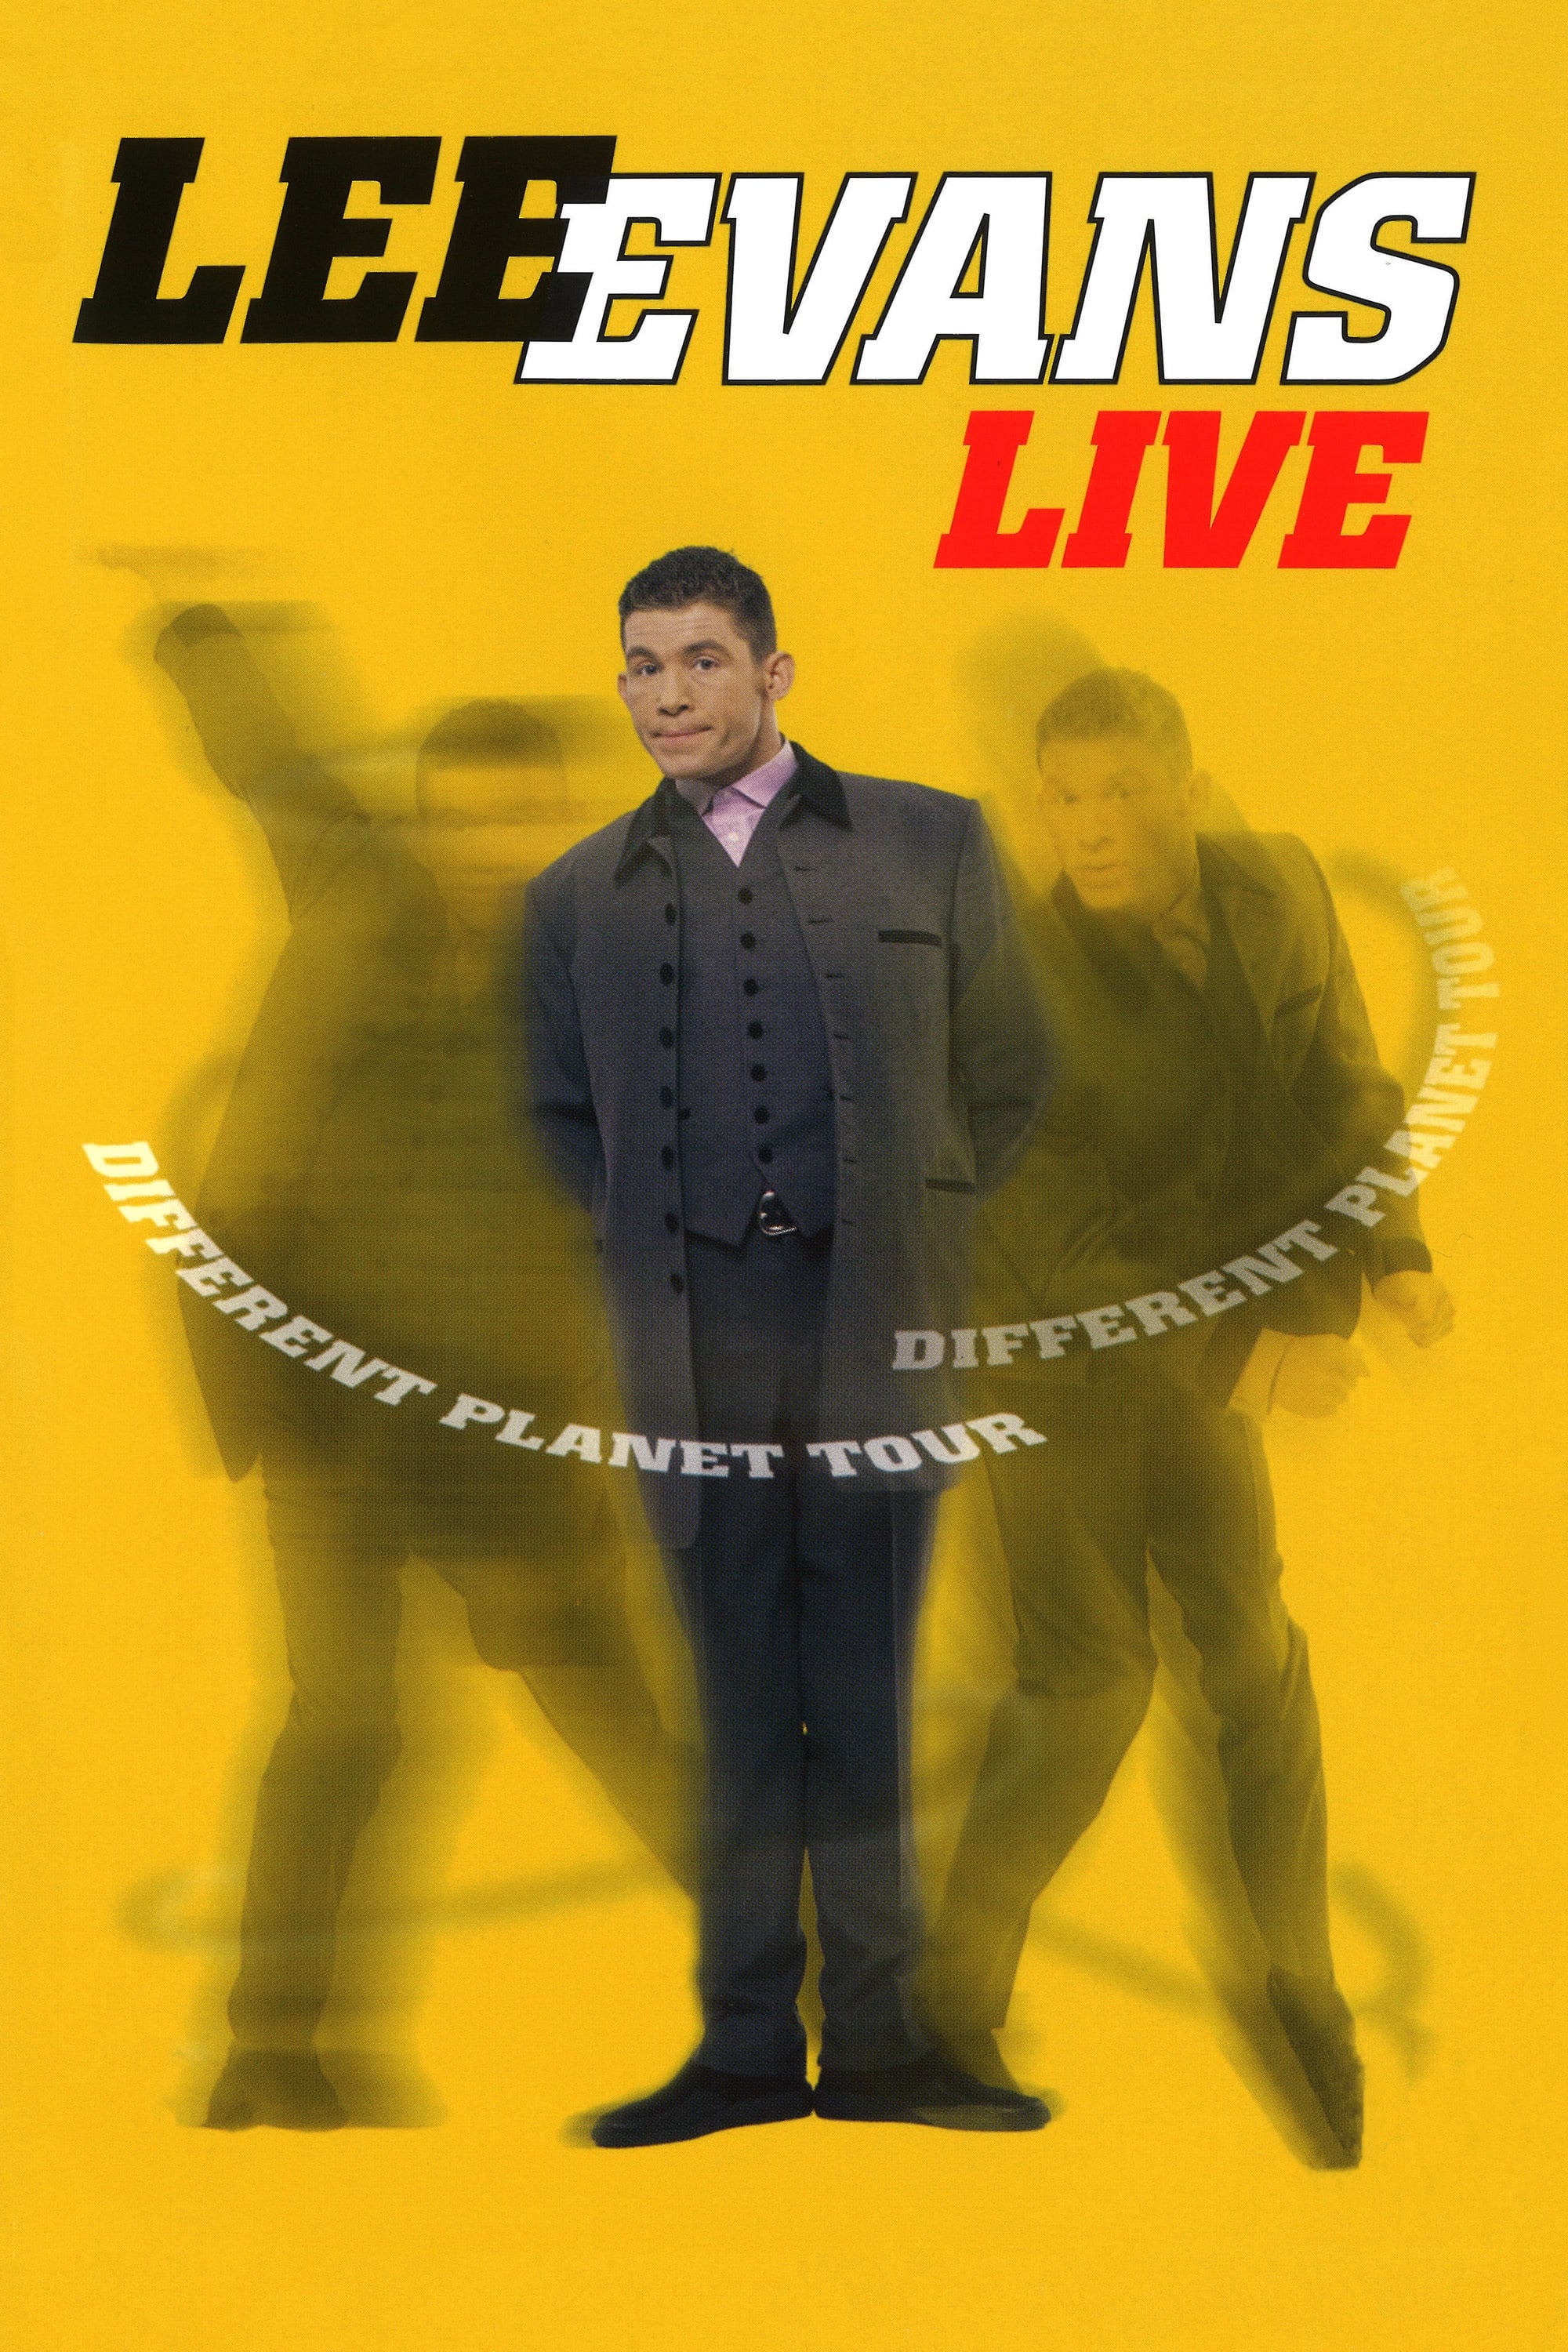 Lee Evans Live: The Different Planet Tour streaming